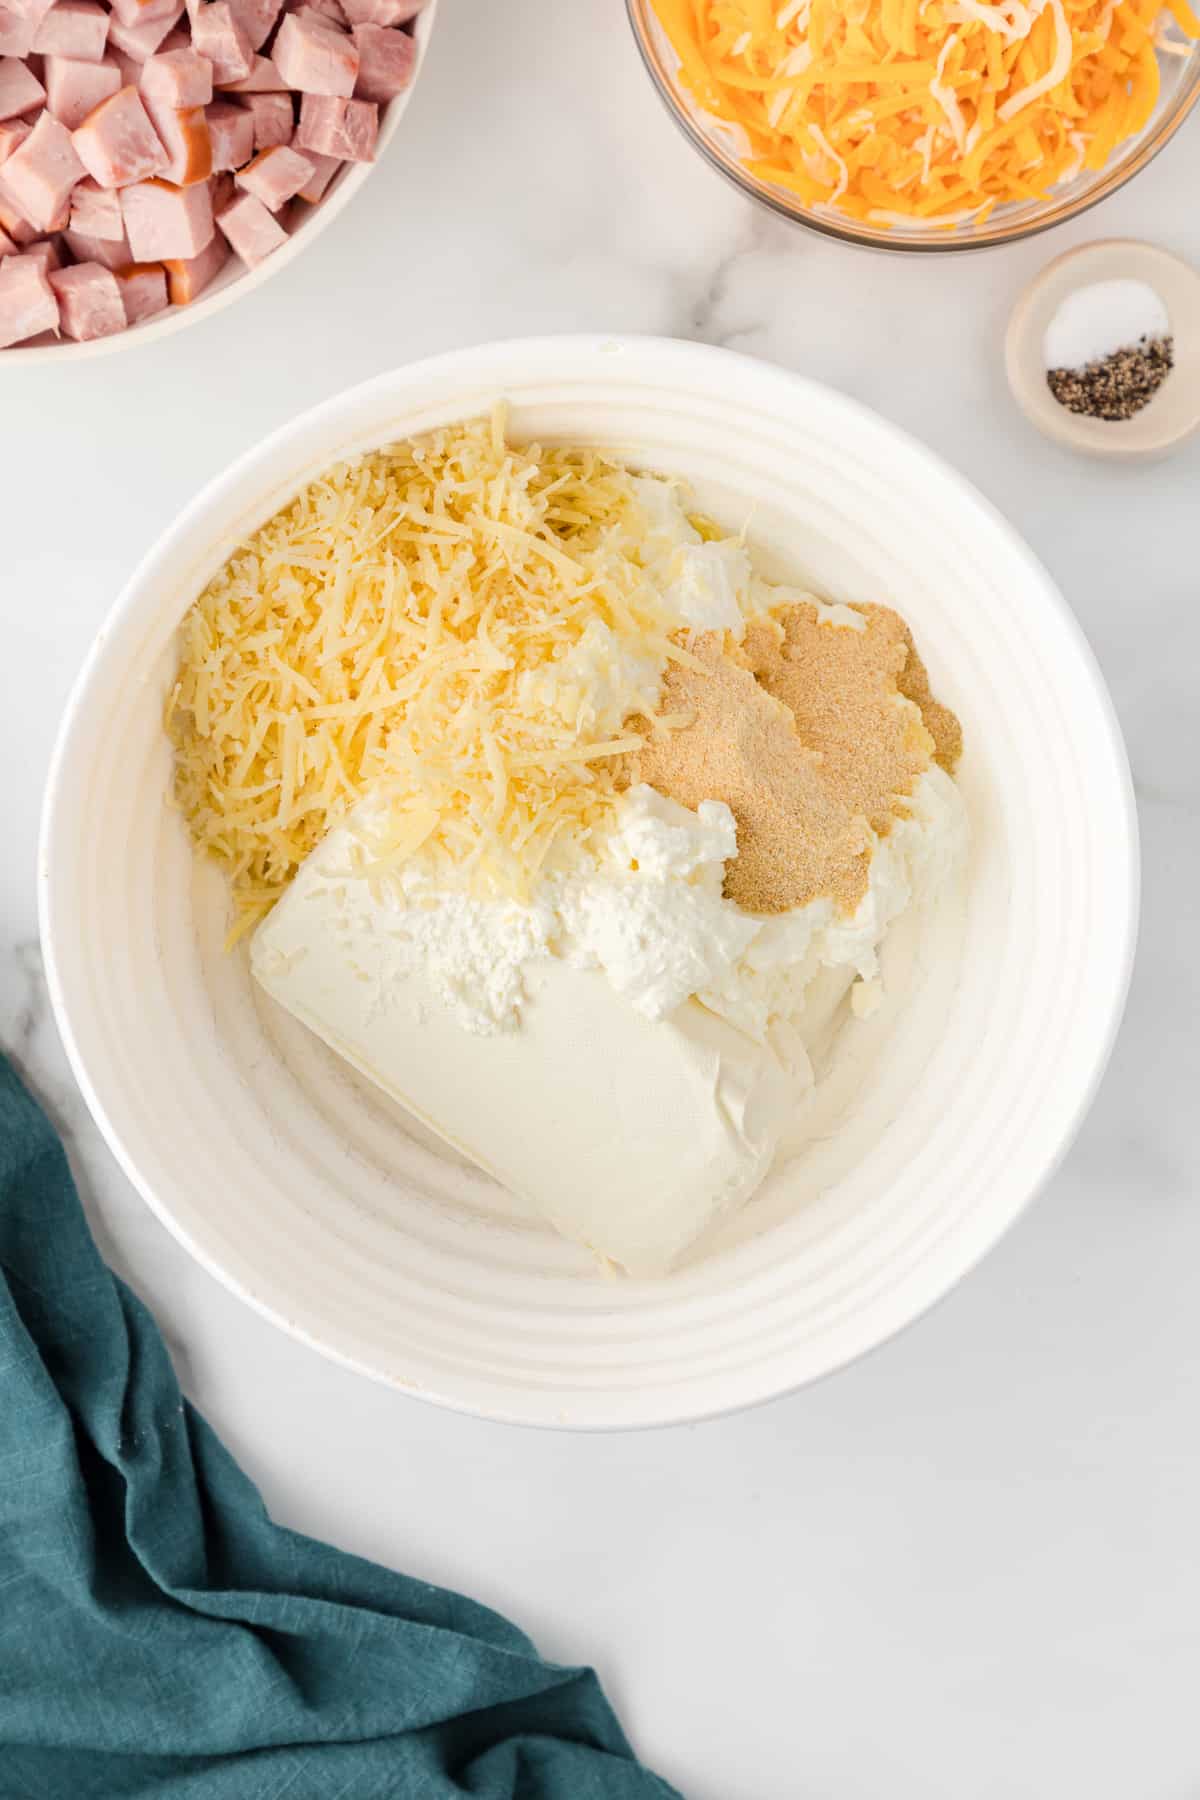 mix the cream cheese, spices, and Parmesan in a small bowl